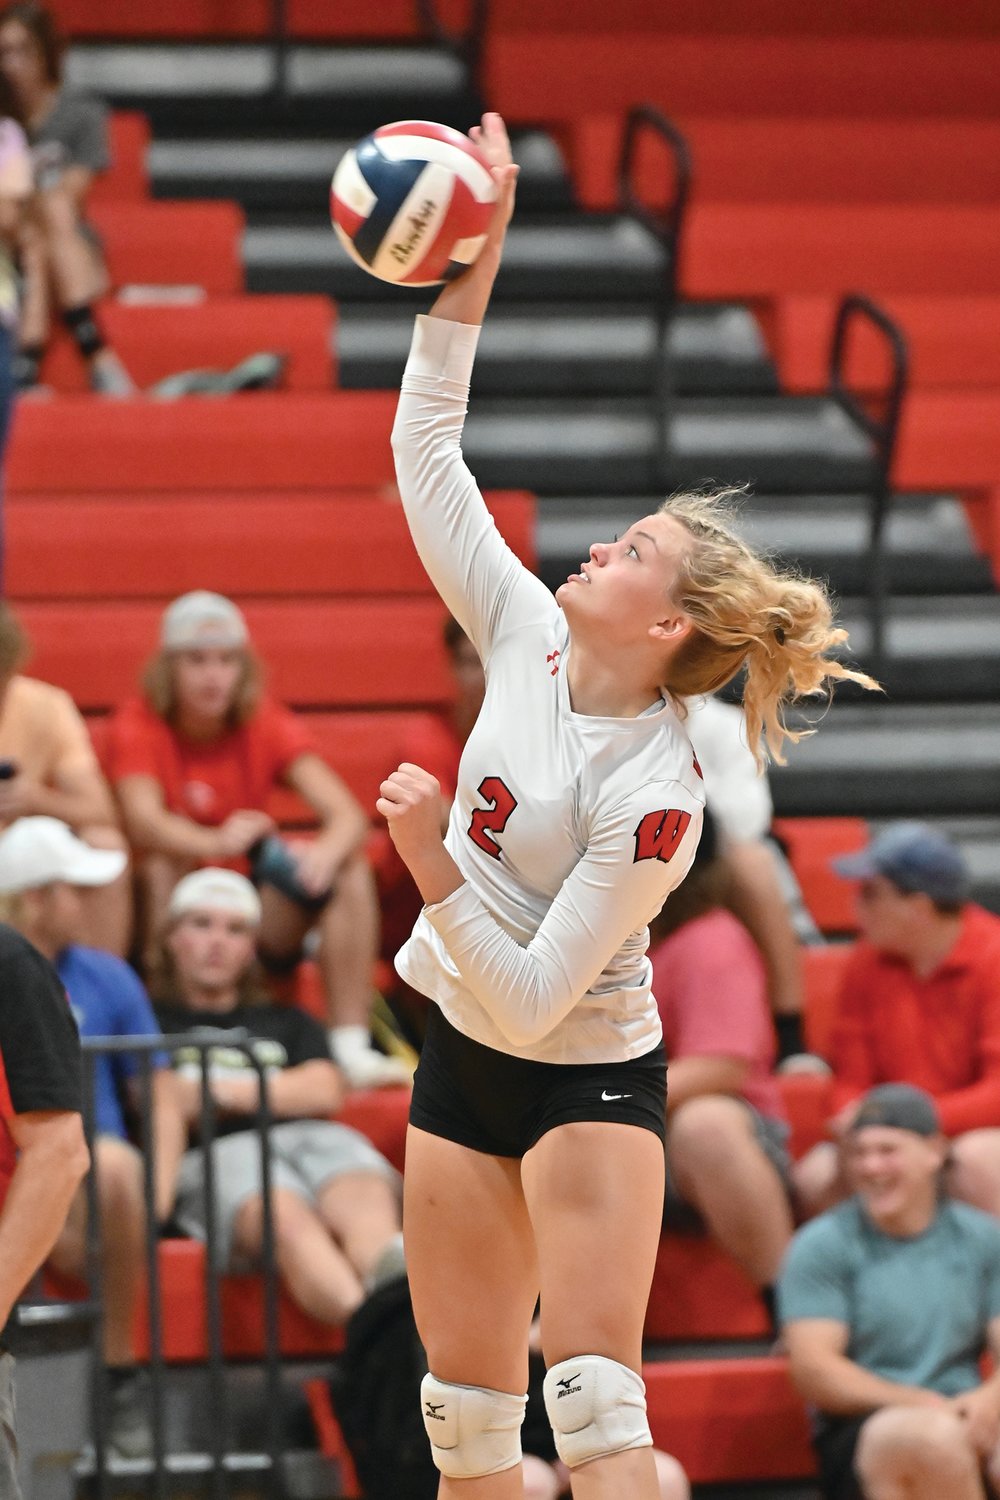 ON THE ATTACK — Warrenton senior Josey Schipper goes up for a hit in Tuesday’s home contest versus St. Clair.